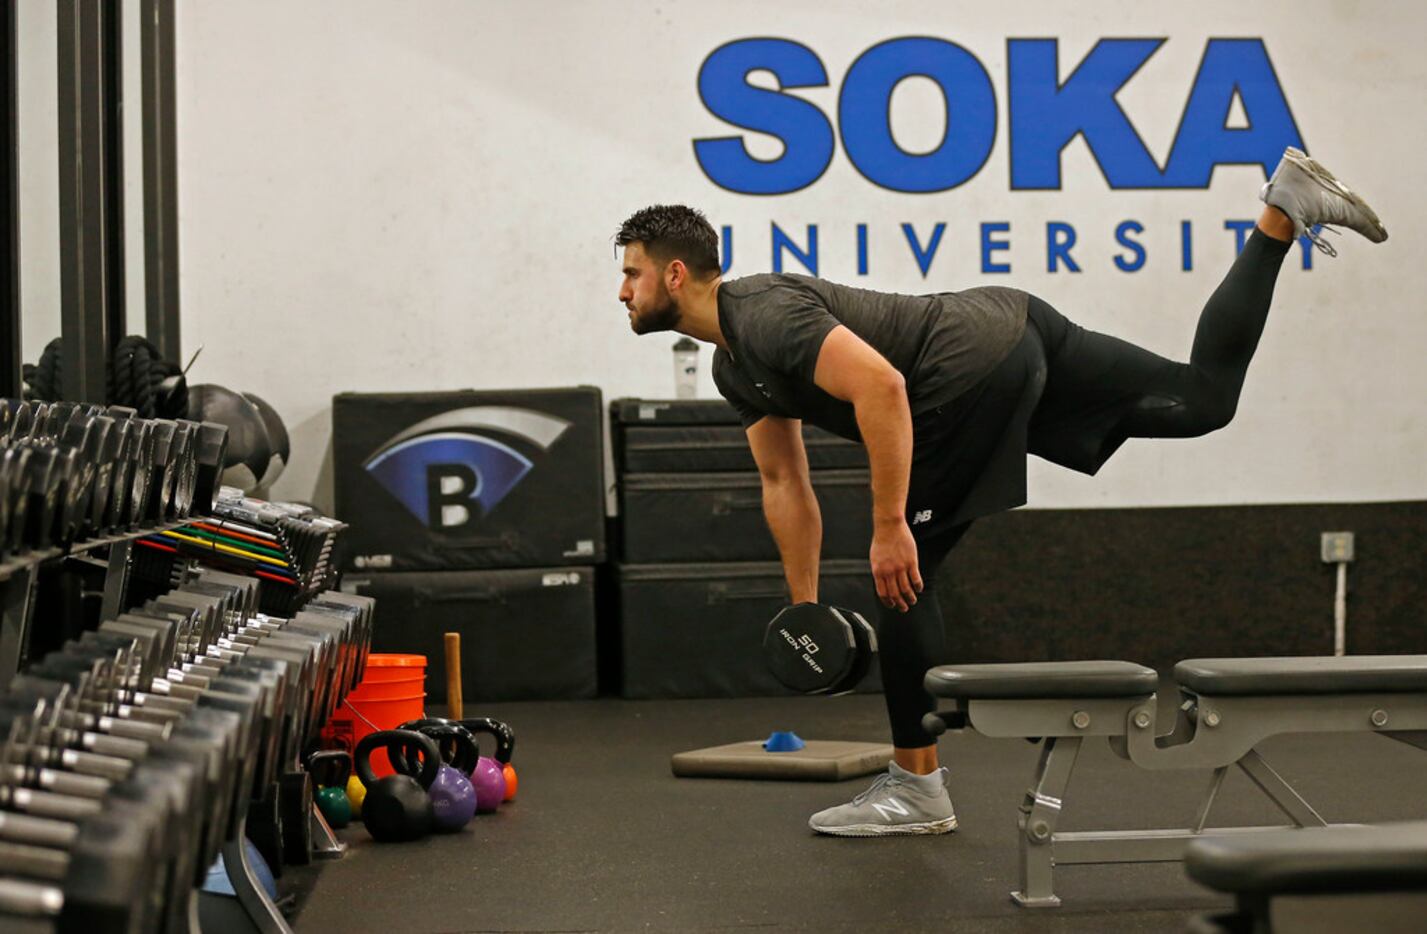 Texas Rangers first baseman Joey Gallo works out at Boras Sports Training Institute during...